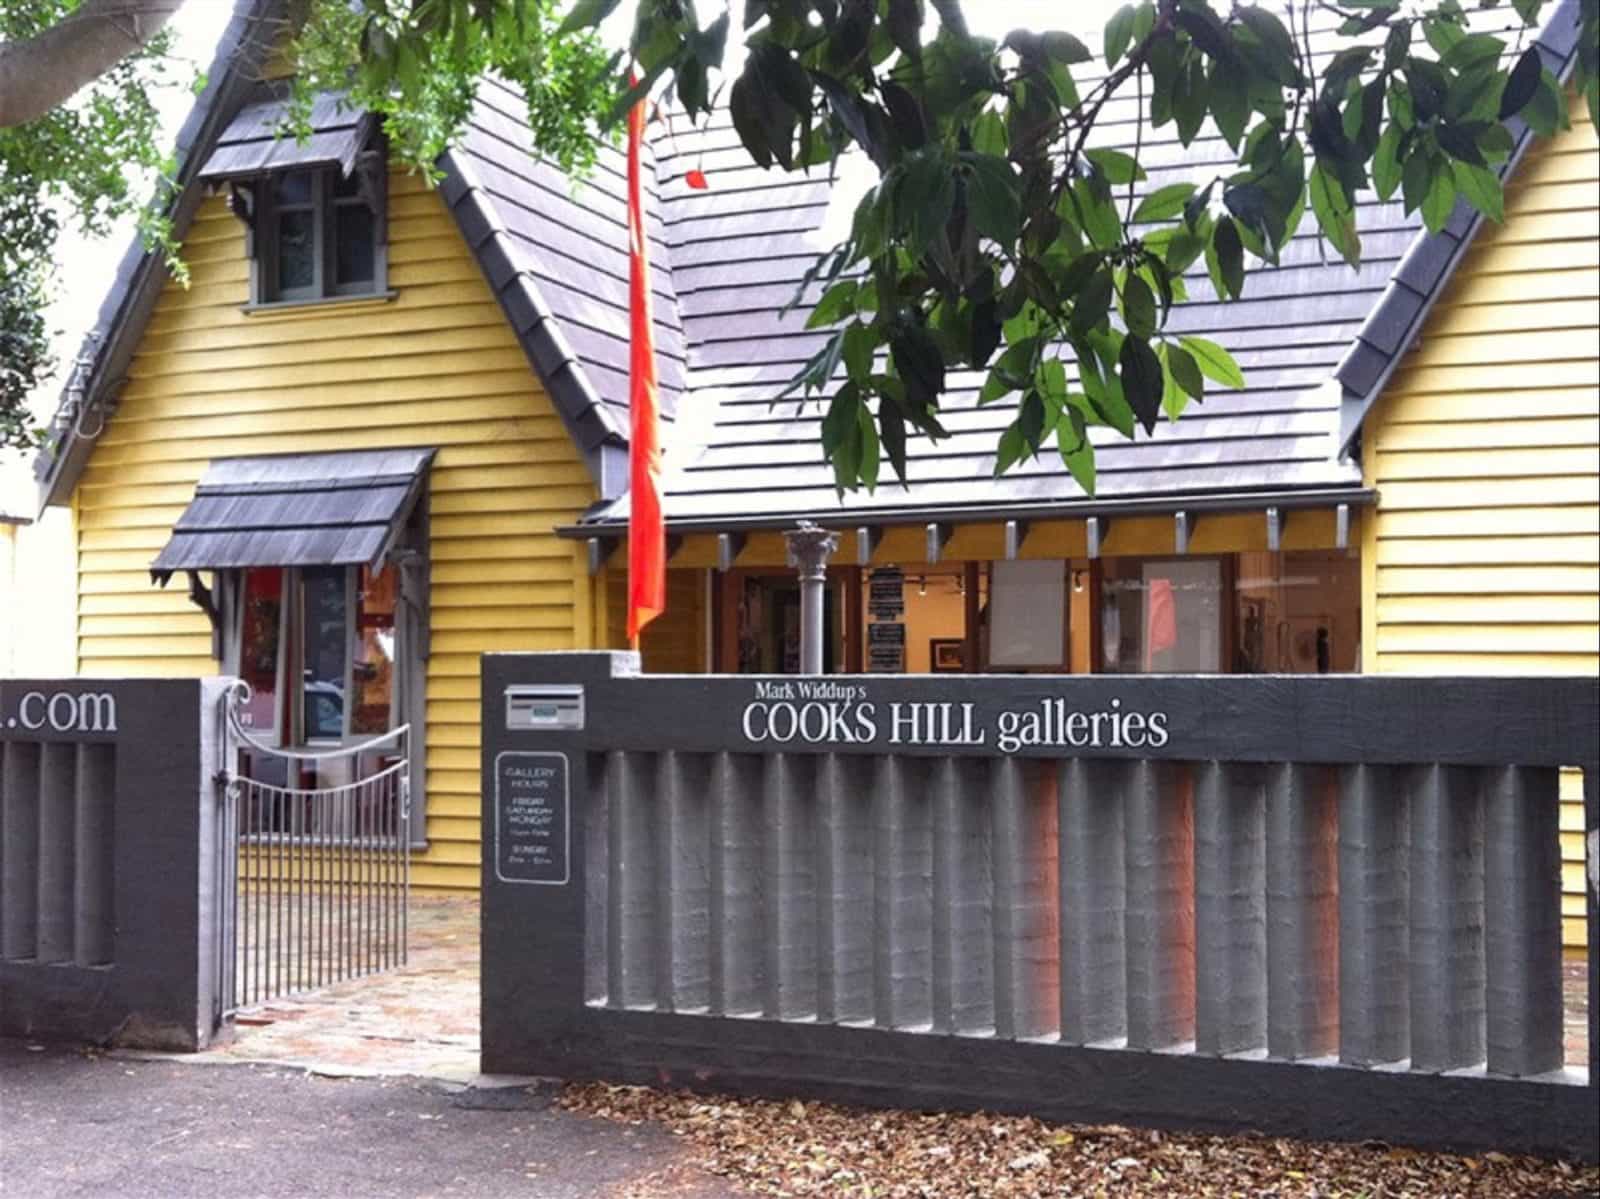 Cooks Hill Gallery